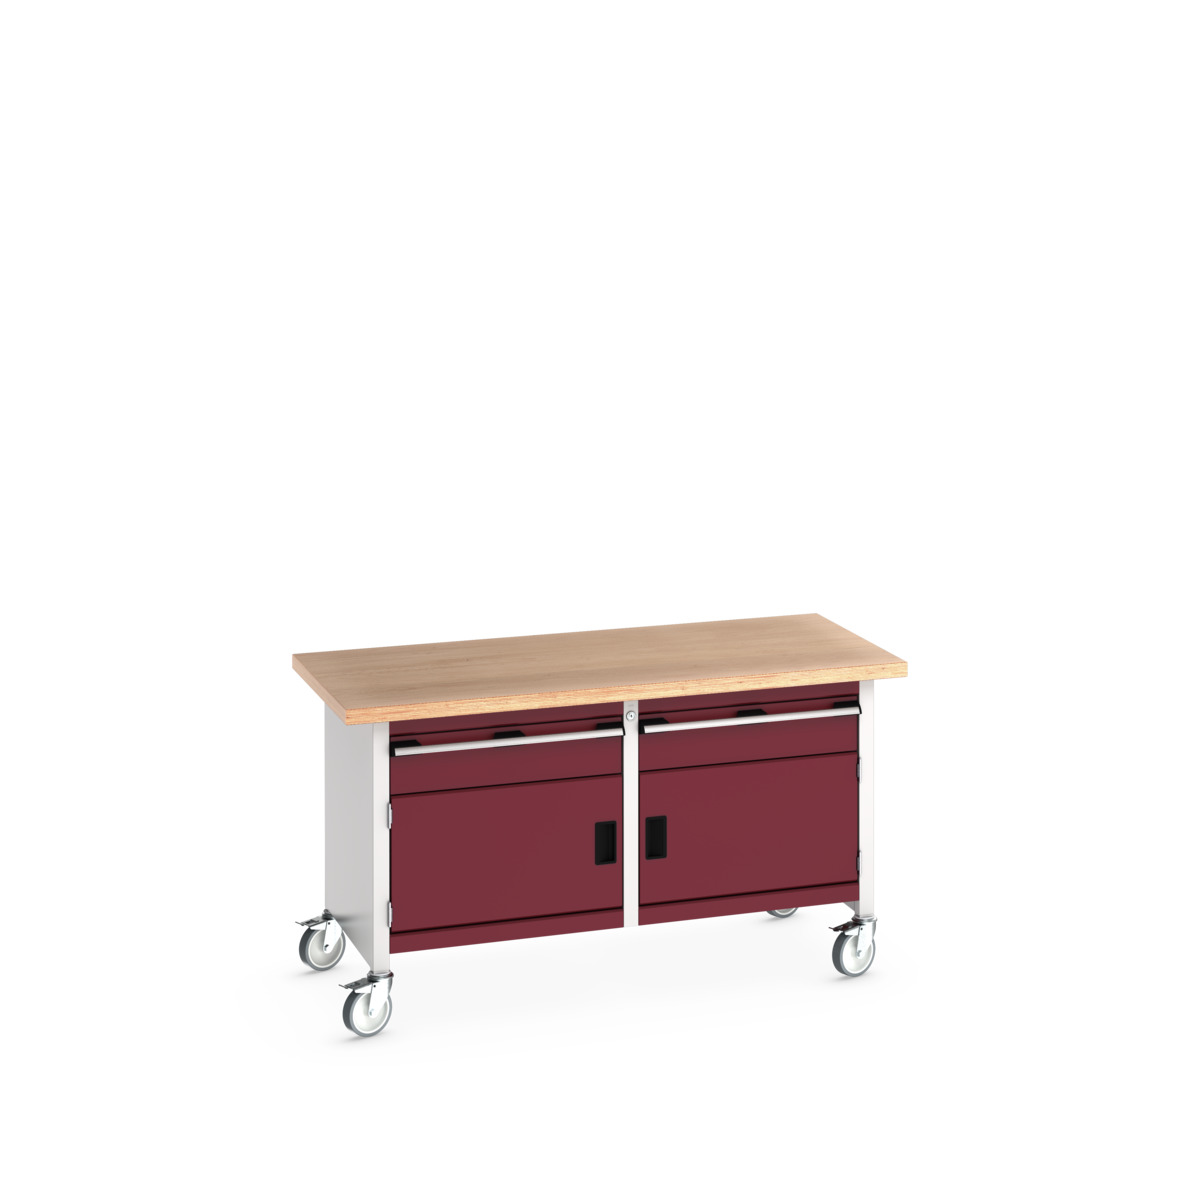 41002103.24V - cubio mobile storage bench (mpx)